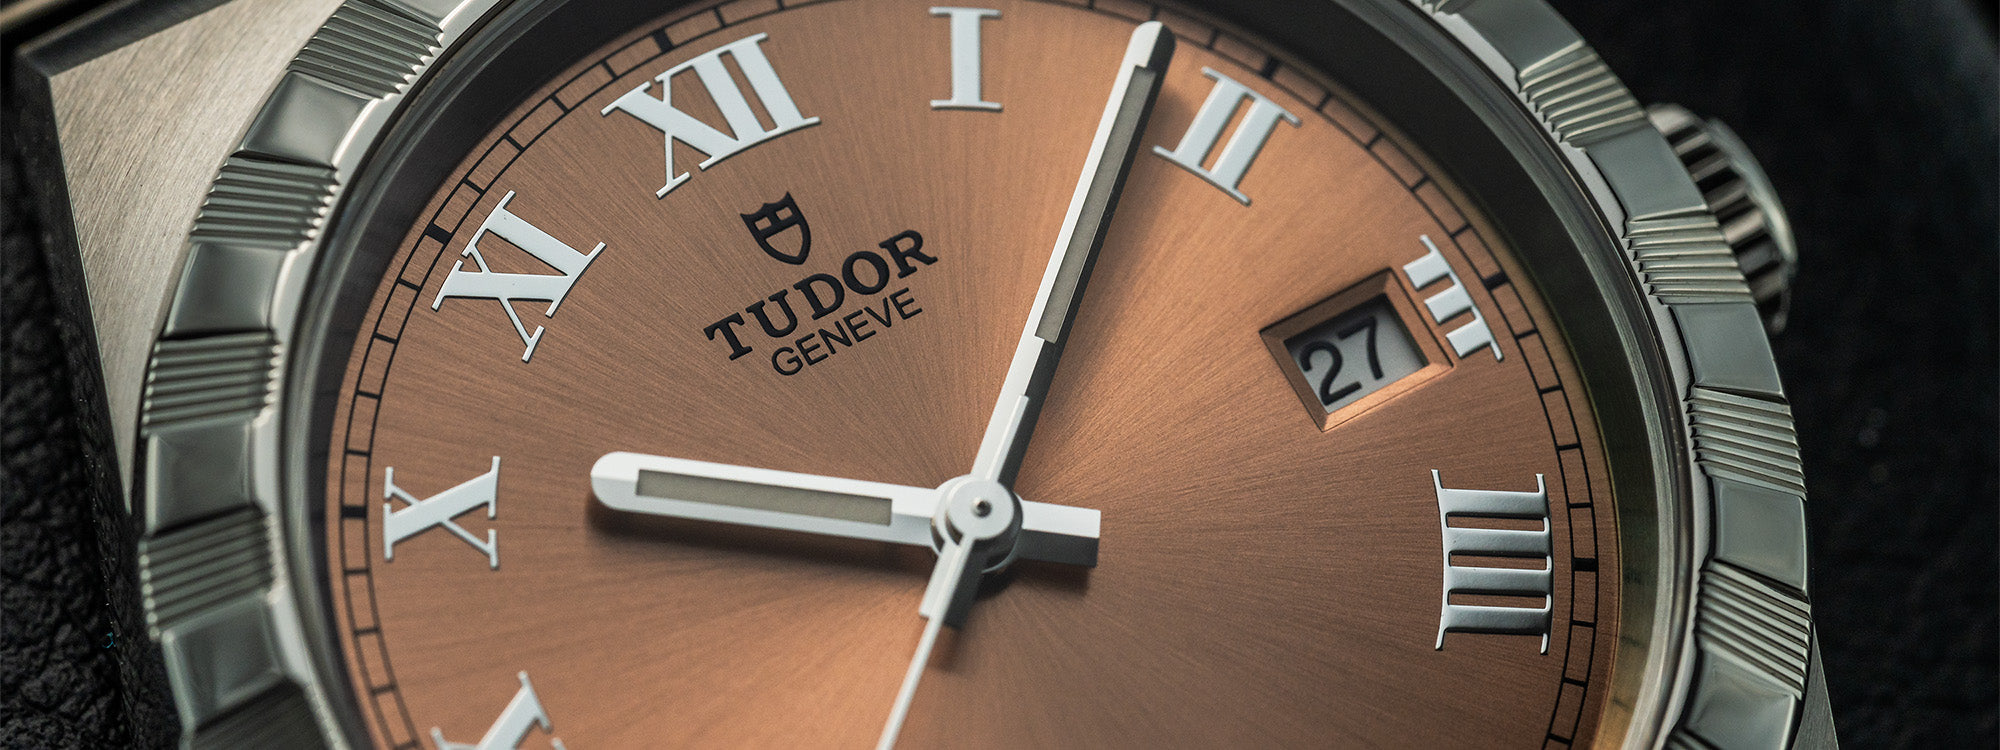 18 Roman Numeral-Dial Watches From Under $500 to $40,000